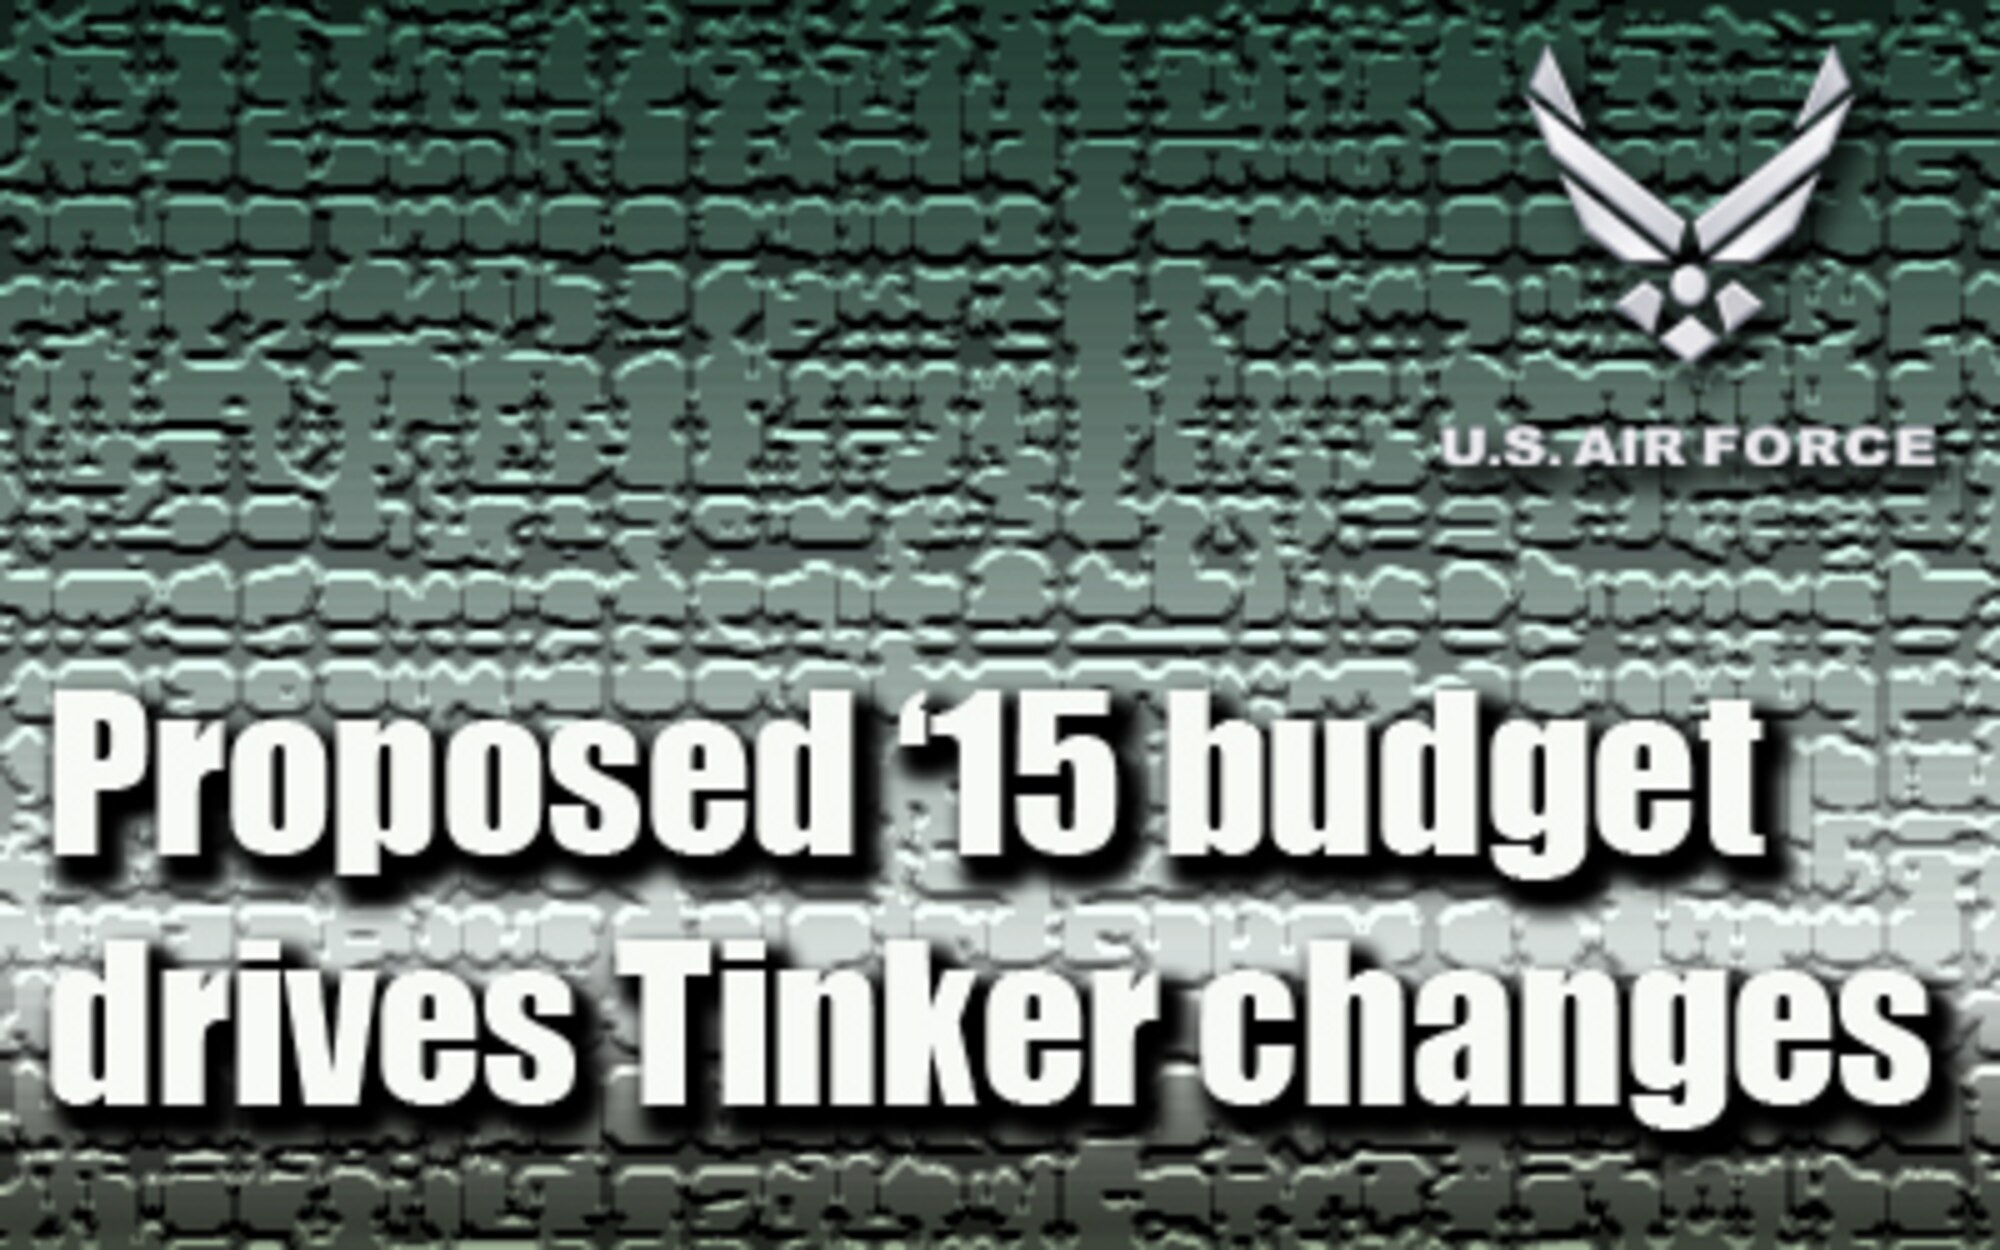 Proposed '15 budget drives Tinker changes